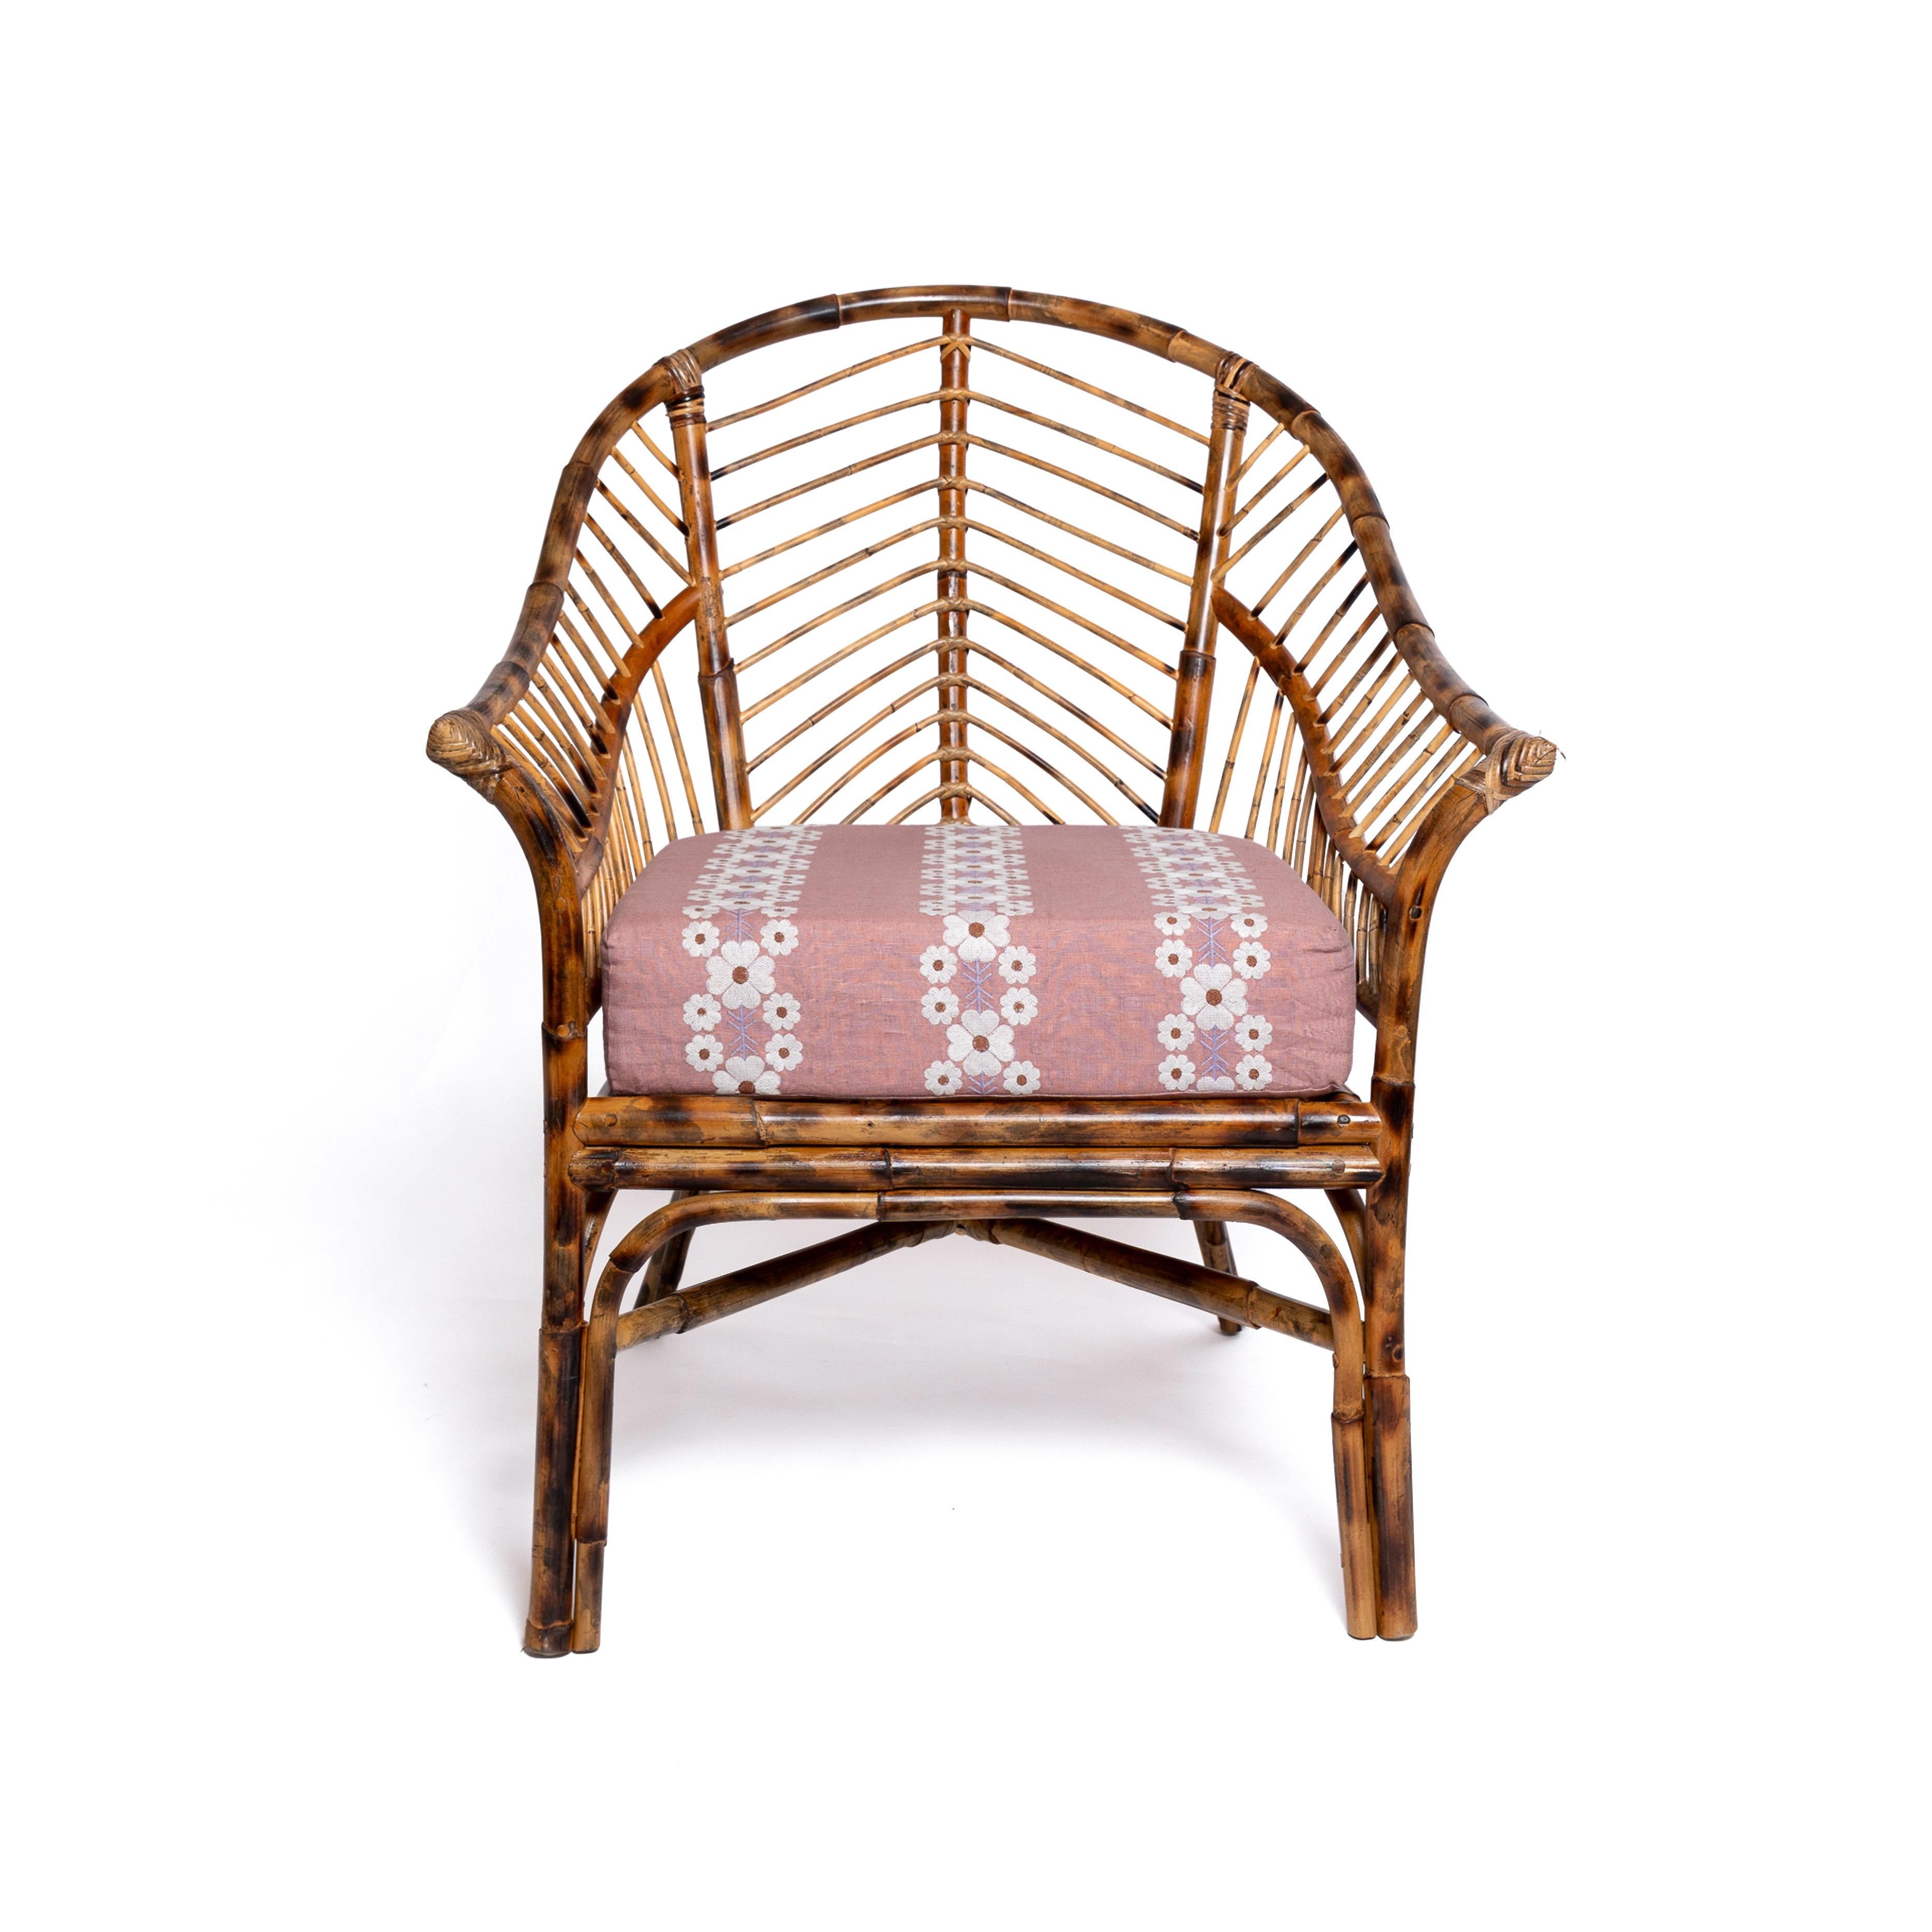 A truly versatile statement chair, designed to draw attention in the office, living room or at the dining table. Our Piolo faux bamboo chair is handcrafted from rattan and then torched, to look like antique bamboo. Choose from three cushion